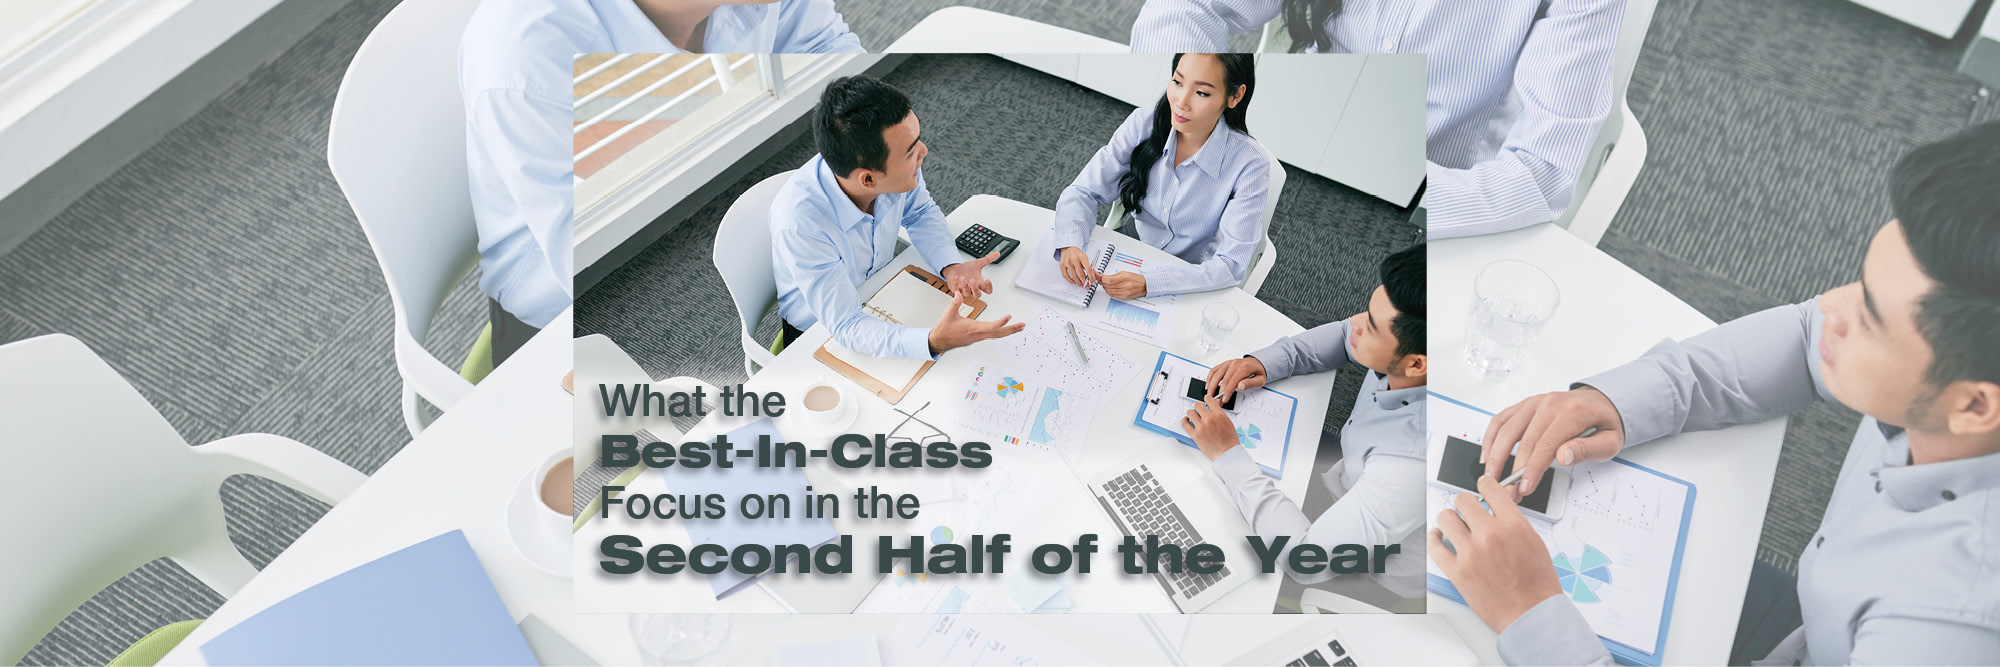 What the Best-In-Class Focus on in the Second Half of the Year